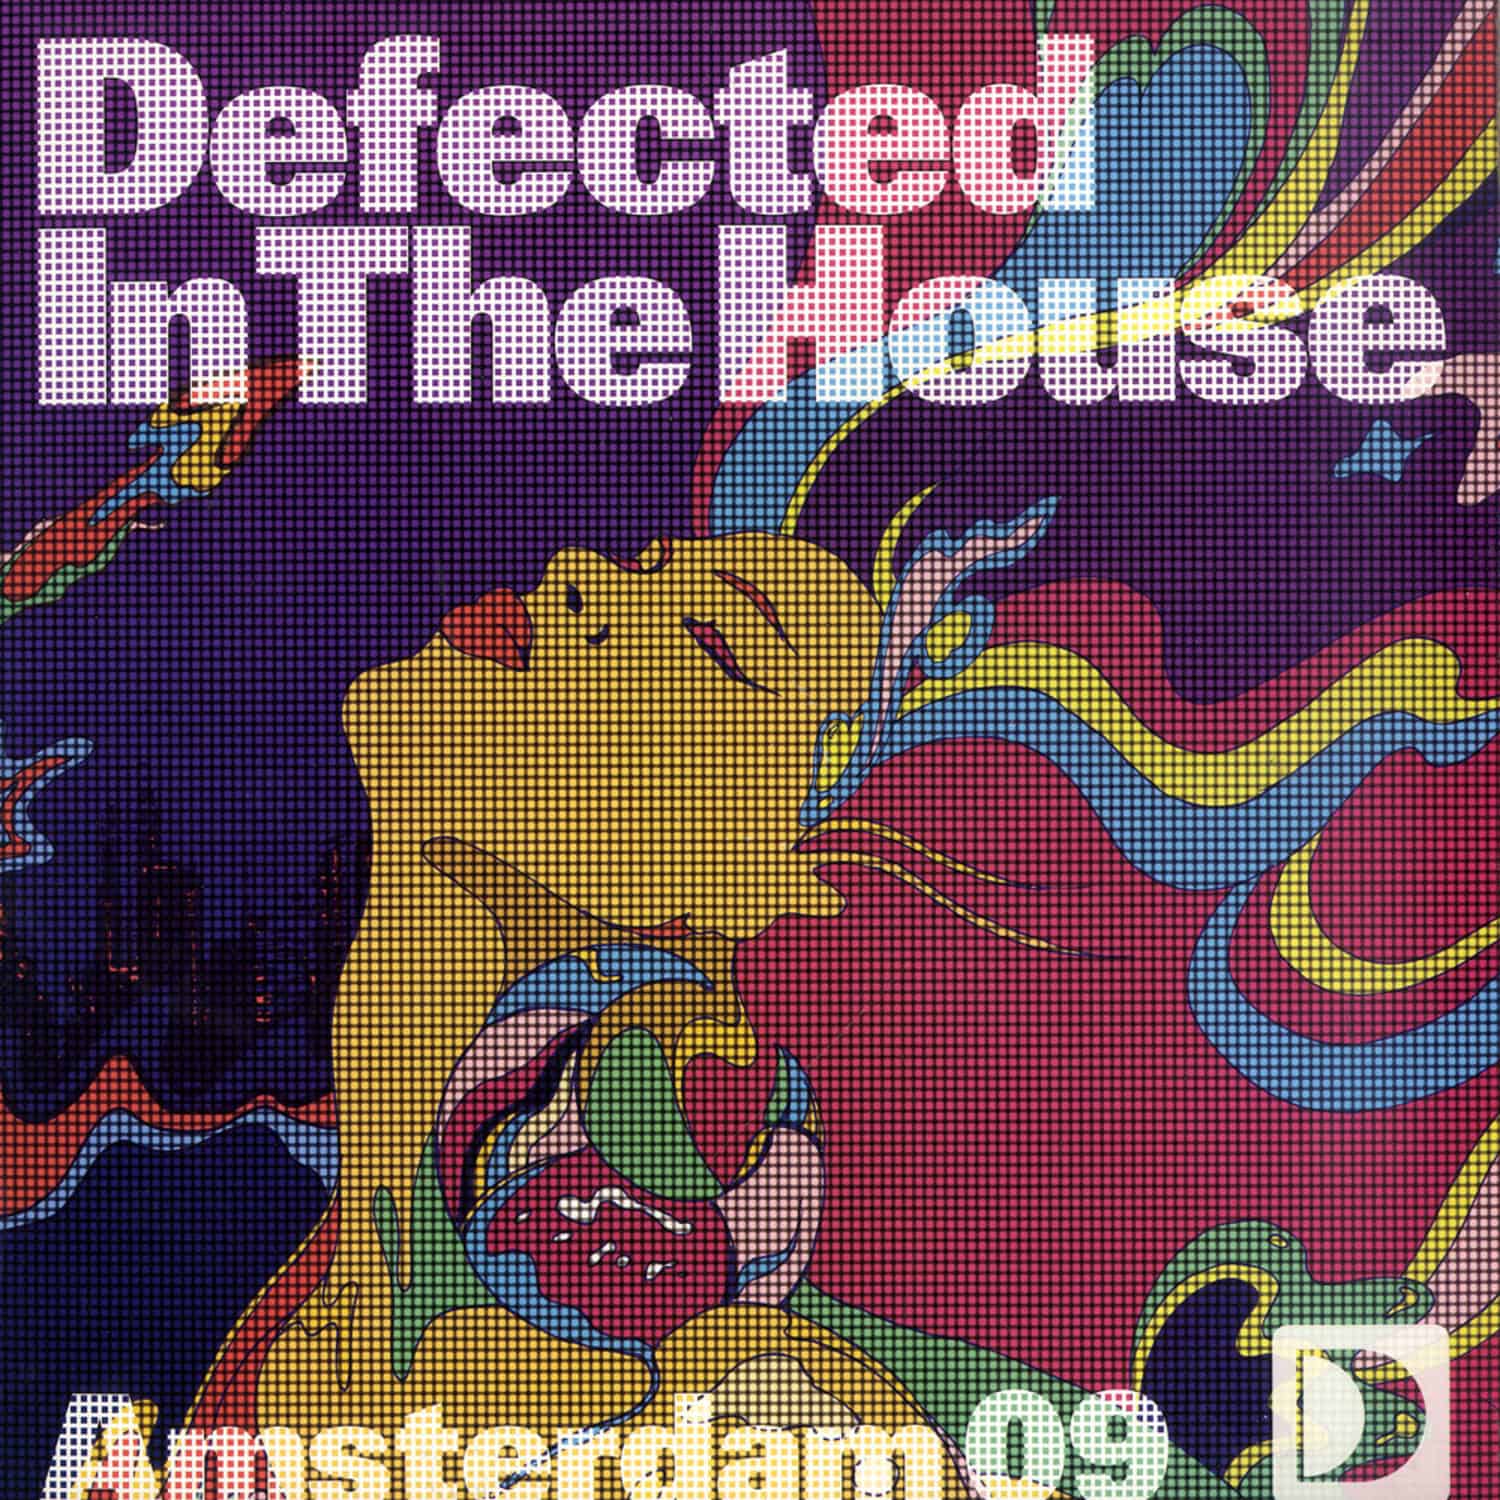 Defected In The House - AMSTERDAM 09 PART 1